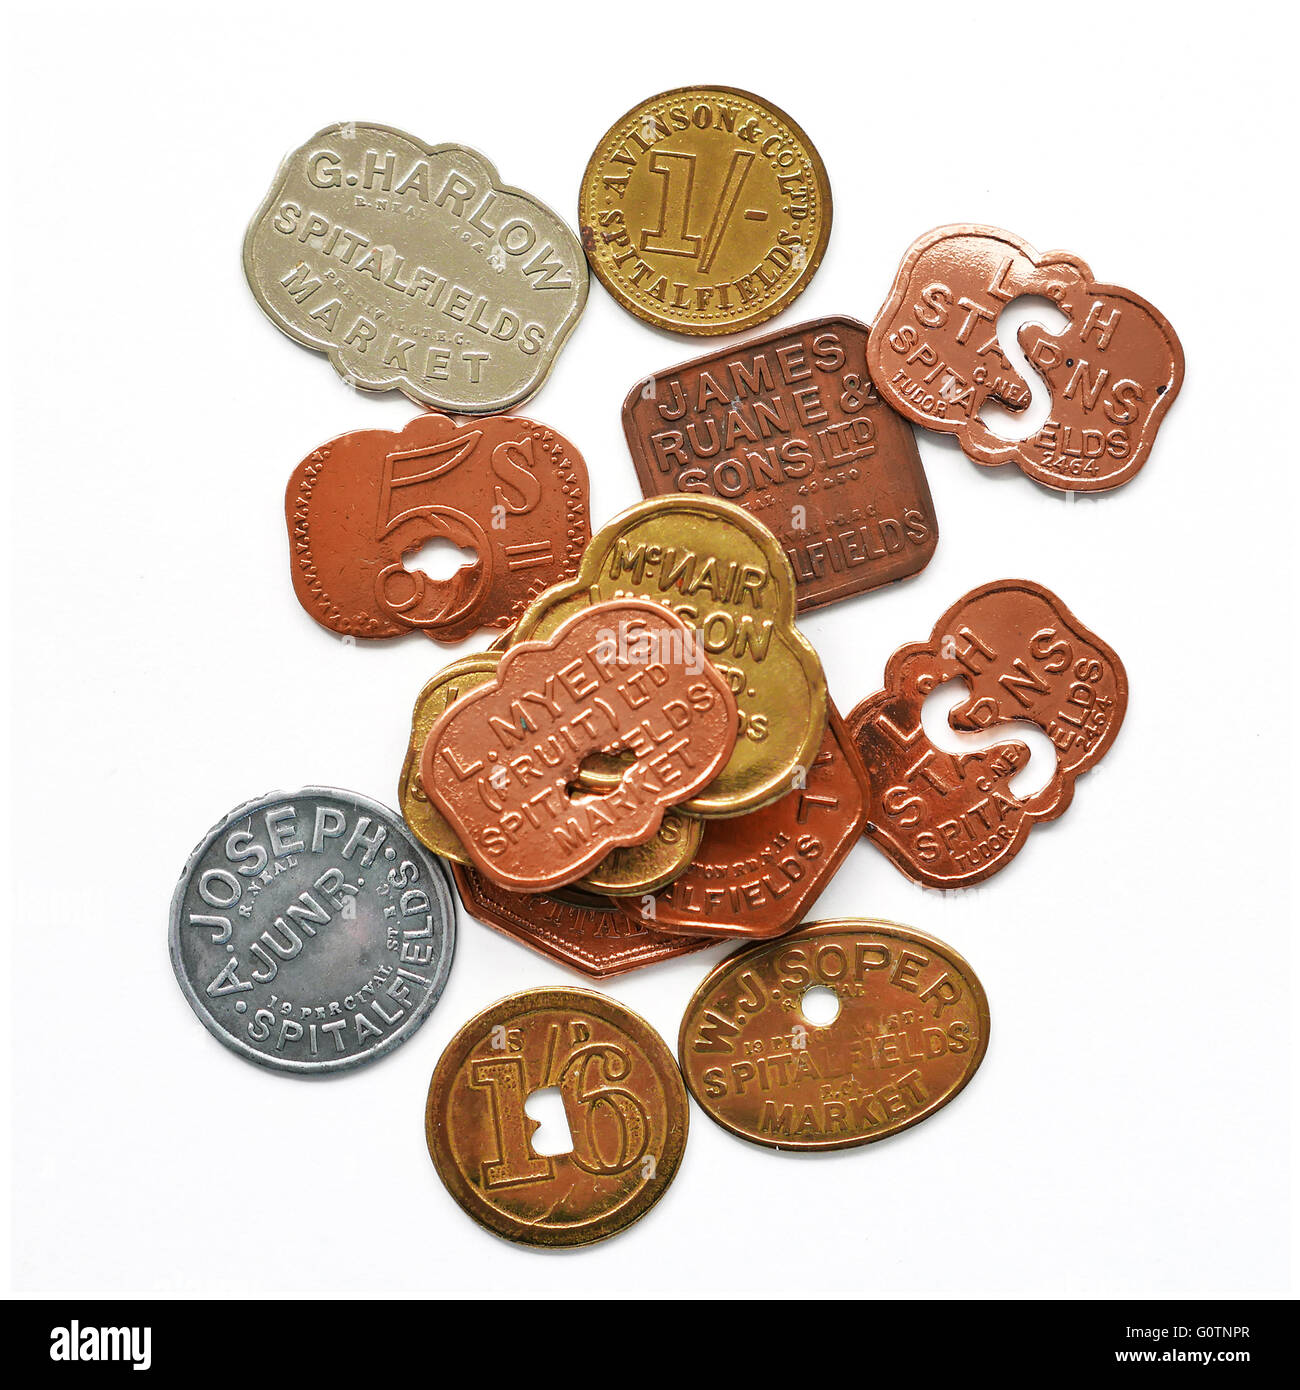 Spitalfields buy and sell tokens used by market traders Stock Photo